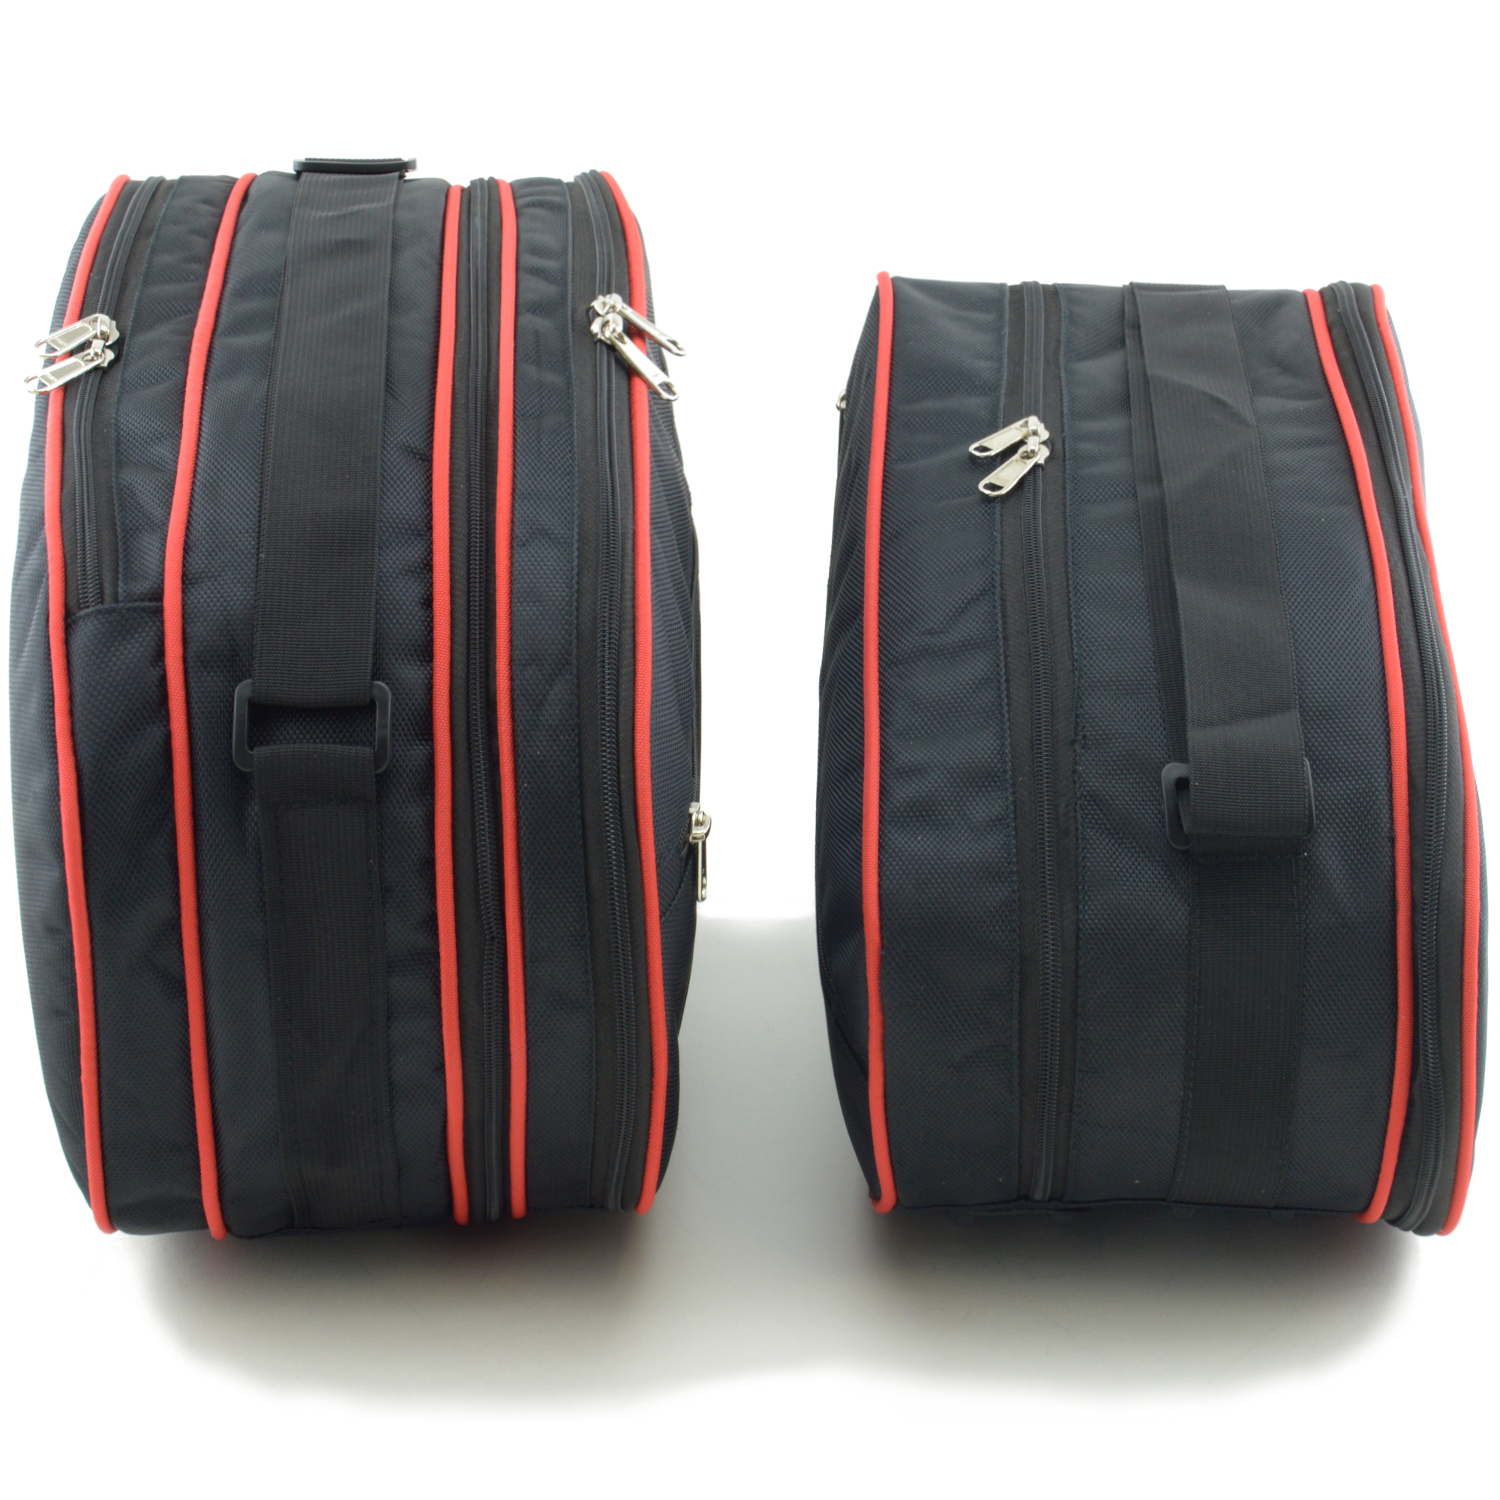 Exact Fit Motorcycle Case Inner Bag 1 Pair for Honda Deauville NT 650 V and 700